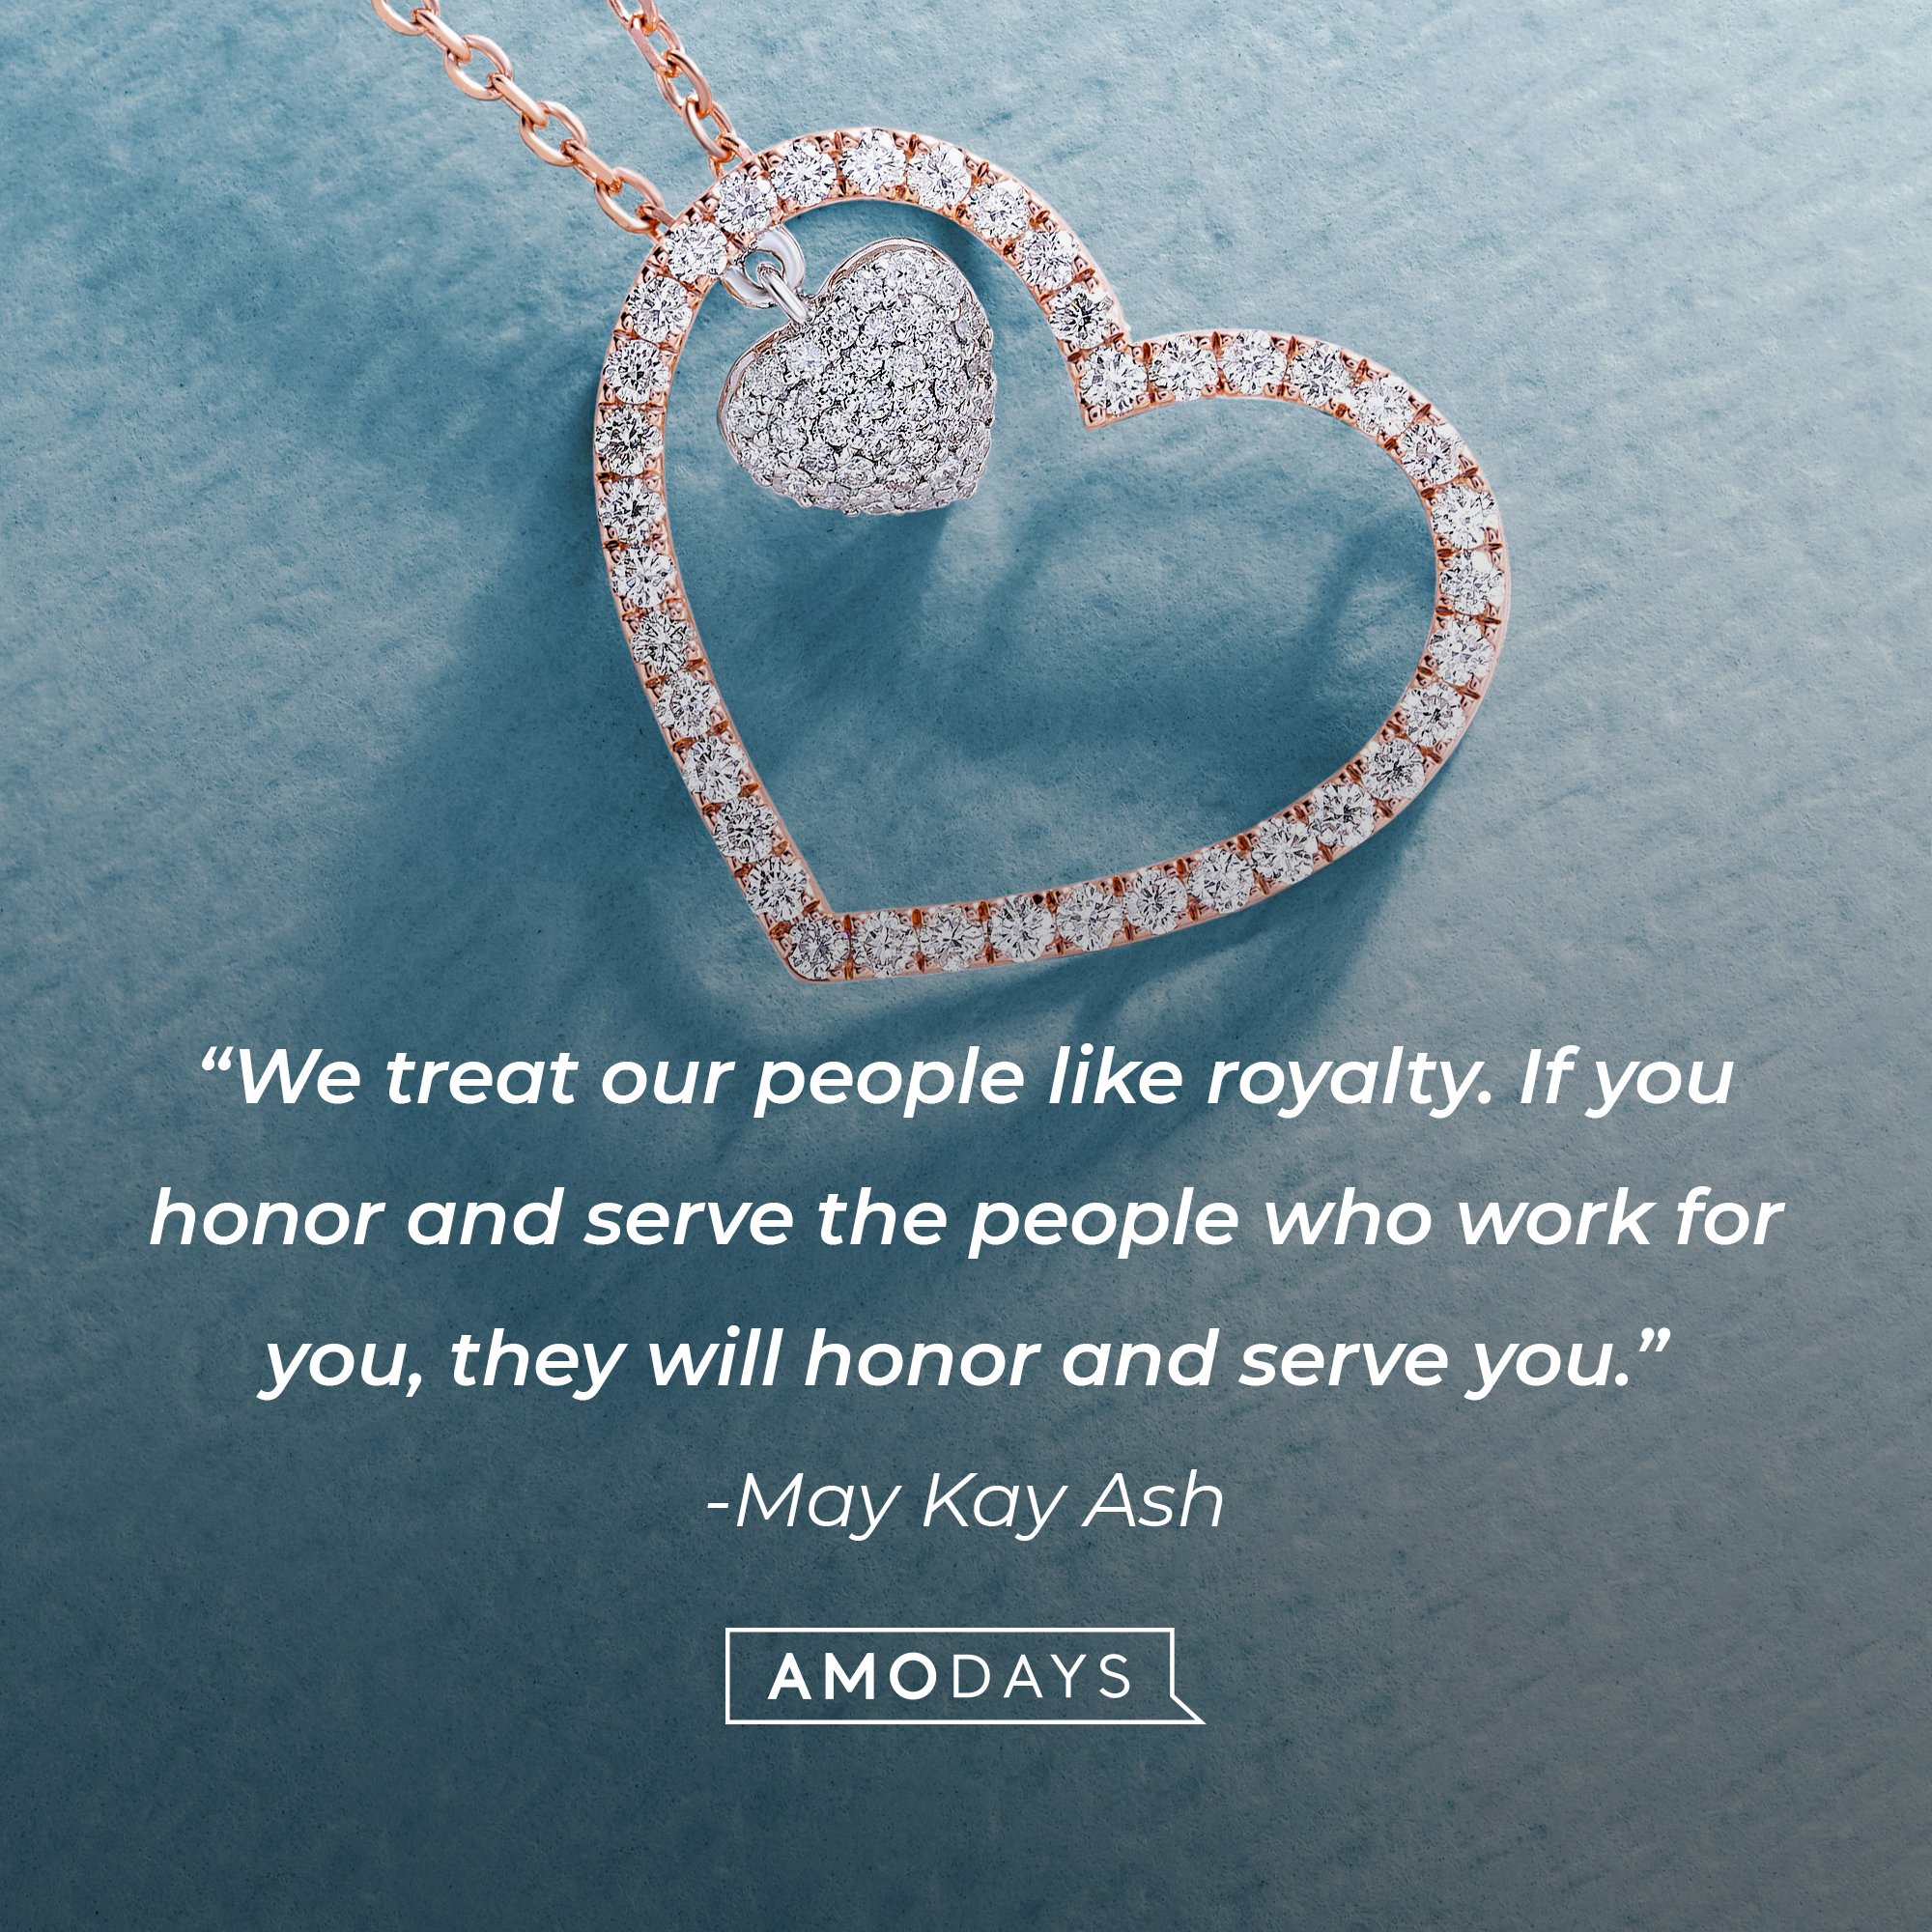 Mary Kay Ash's quote: "We treat our people like royalty. If you honor and serve the people who work for you, they will honor and serve you." | Image: AmoDays